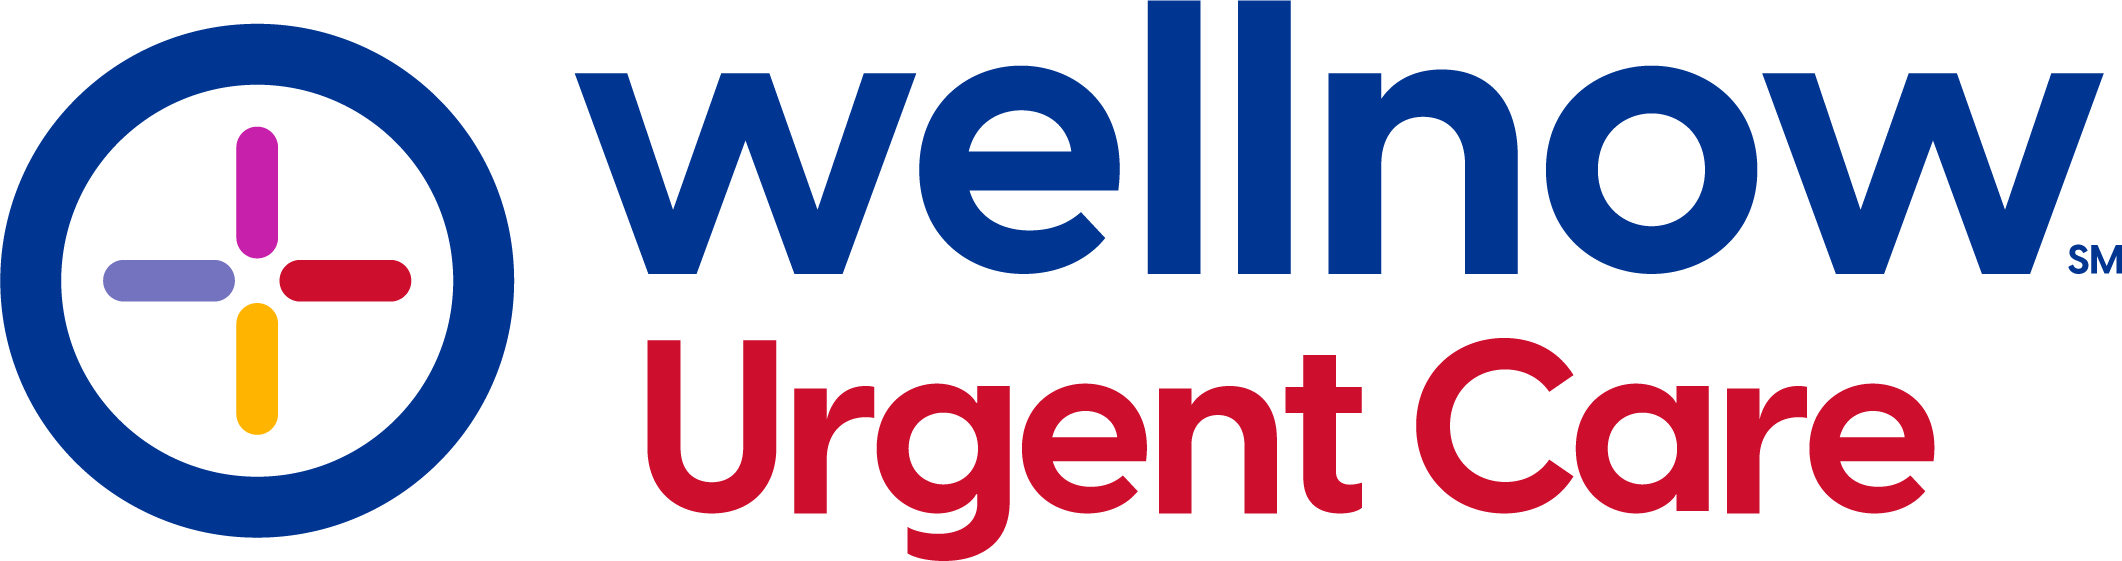 WellNow Urgent Care offers quick, quality urgent care with exceptional service for the non-life-threatening injuries and illnesses that you or your family may face. From coughs and colds to sprains and strains, we proudly offer convenient healthcare with online check-ins.